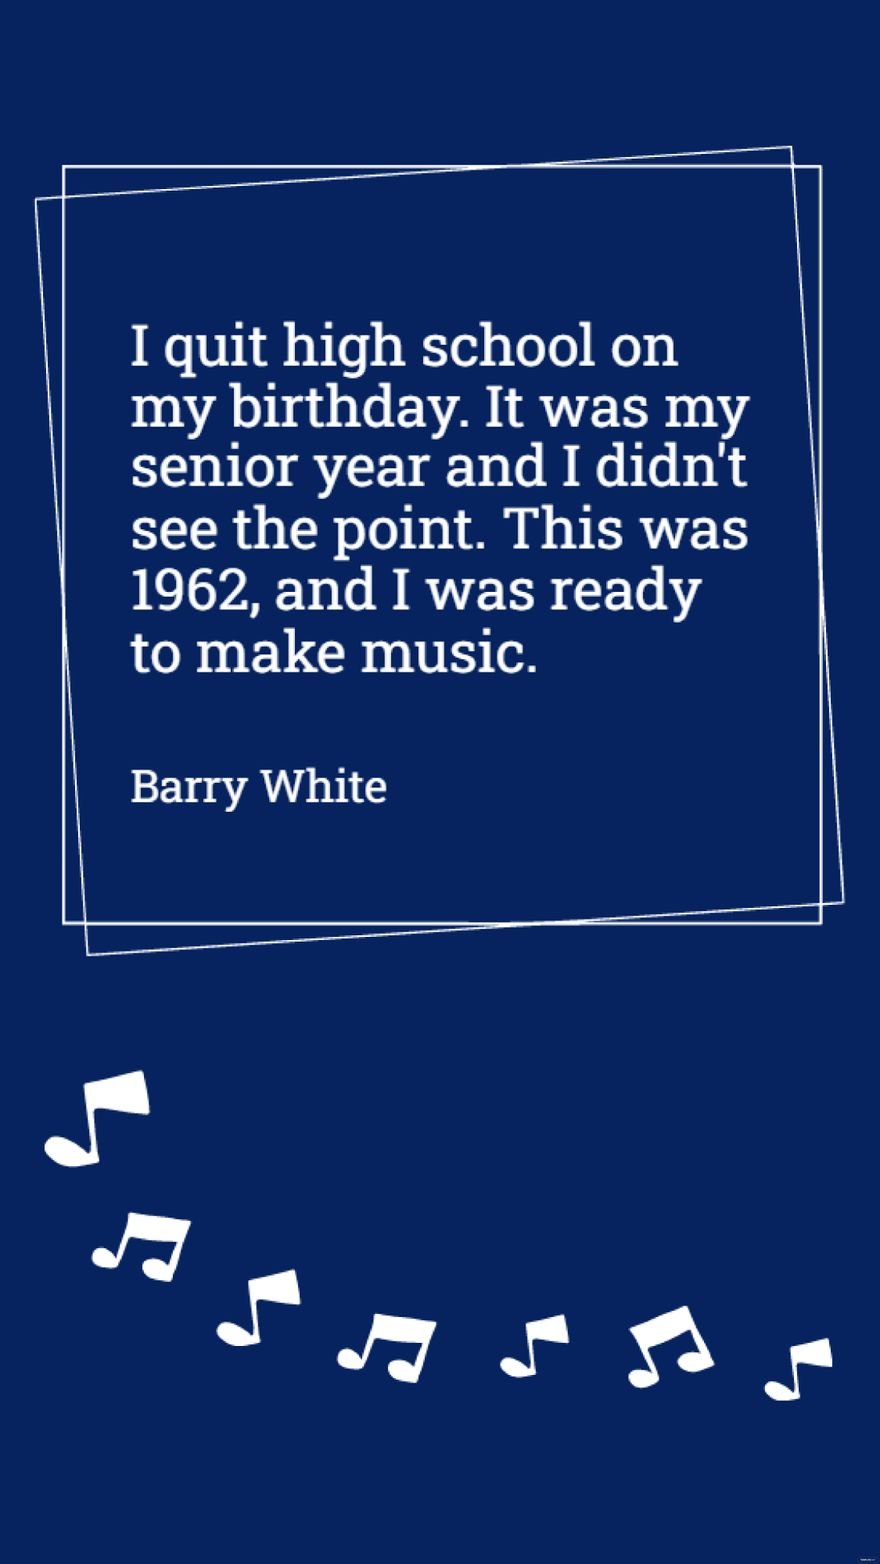 Free Barry White - I quit high school on my birthday. It was my senior year and I didn't see the point. This was 1962, and I was ready to make music.